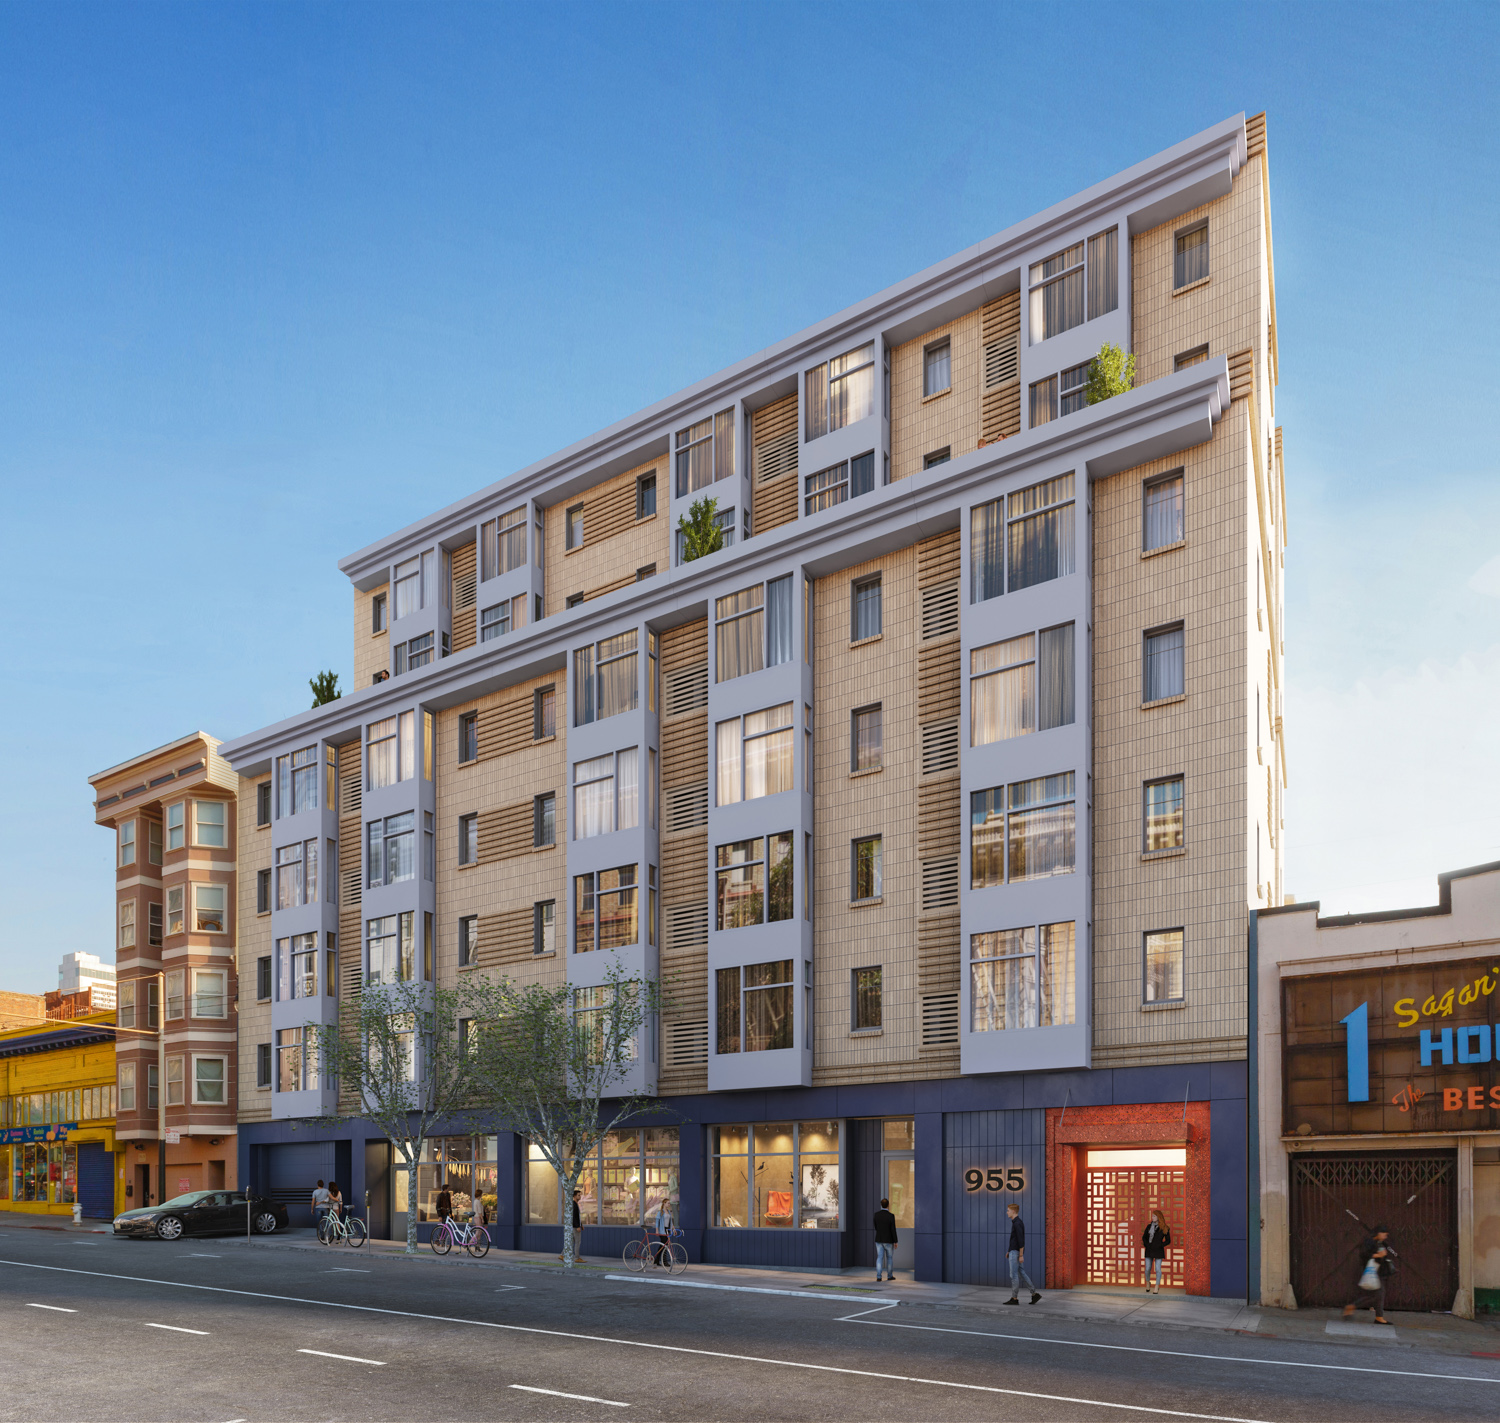 955 Post Street from Street View, rendering by Transparent House with Page & Turnbull